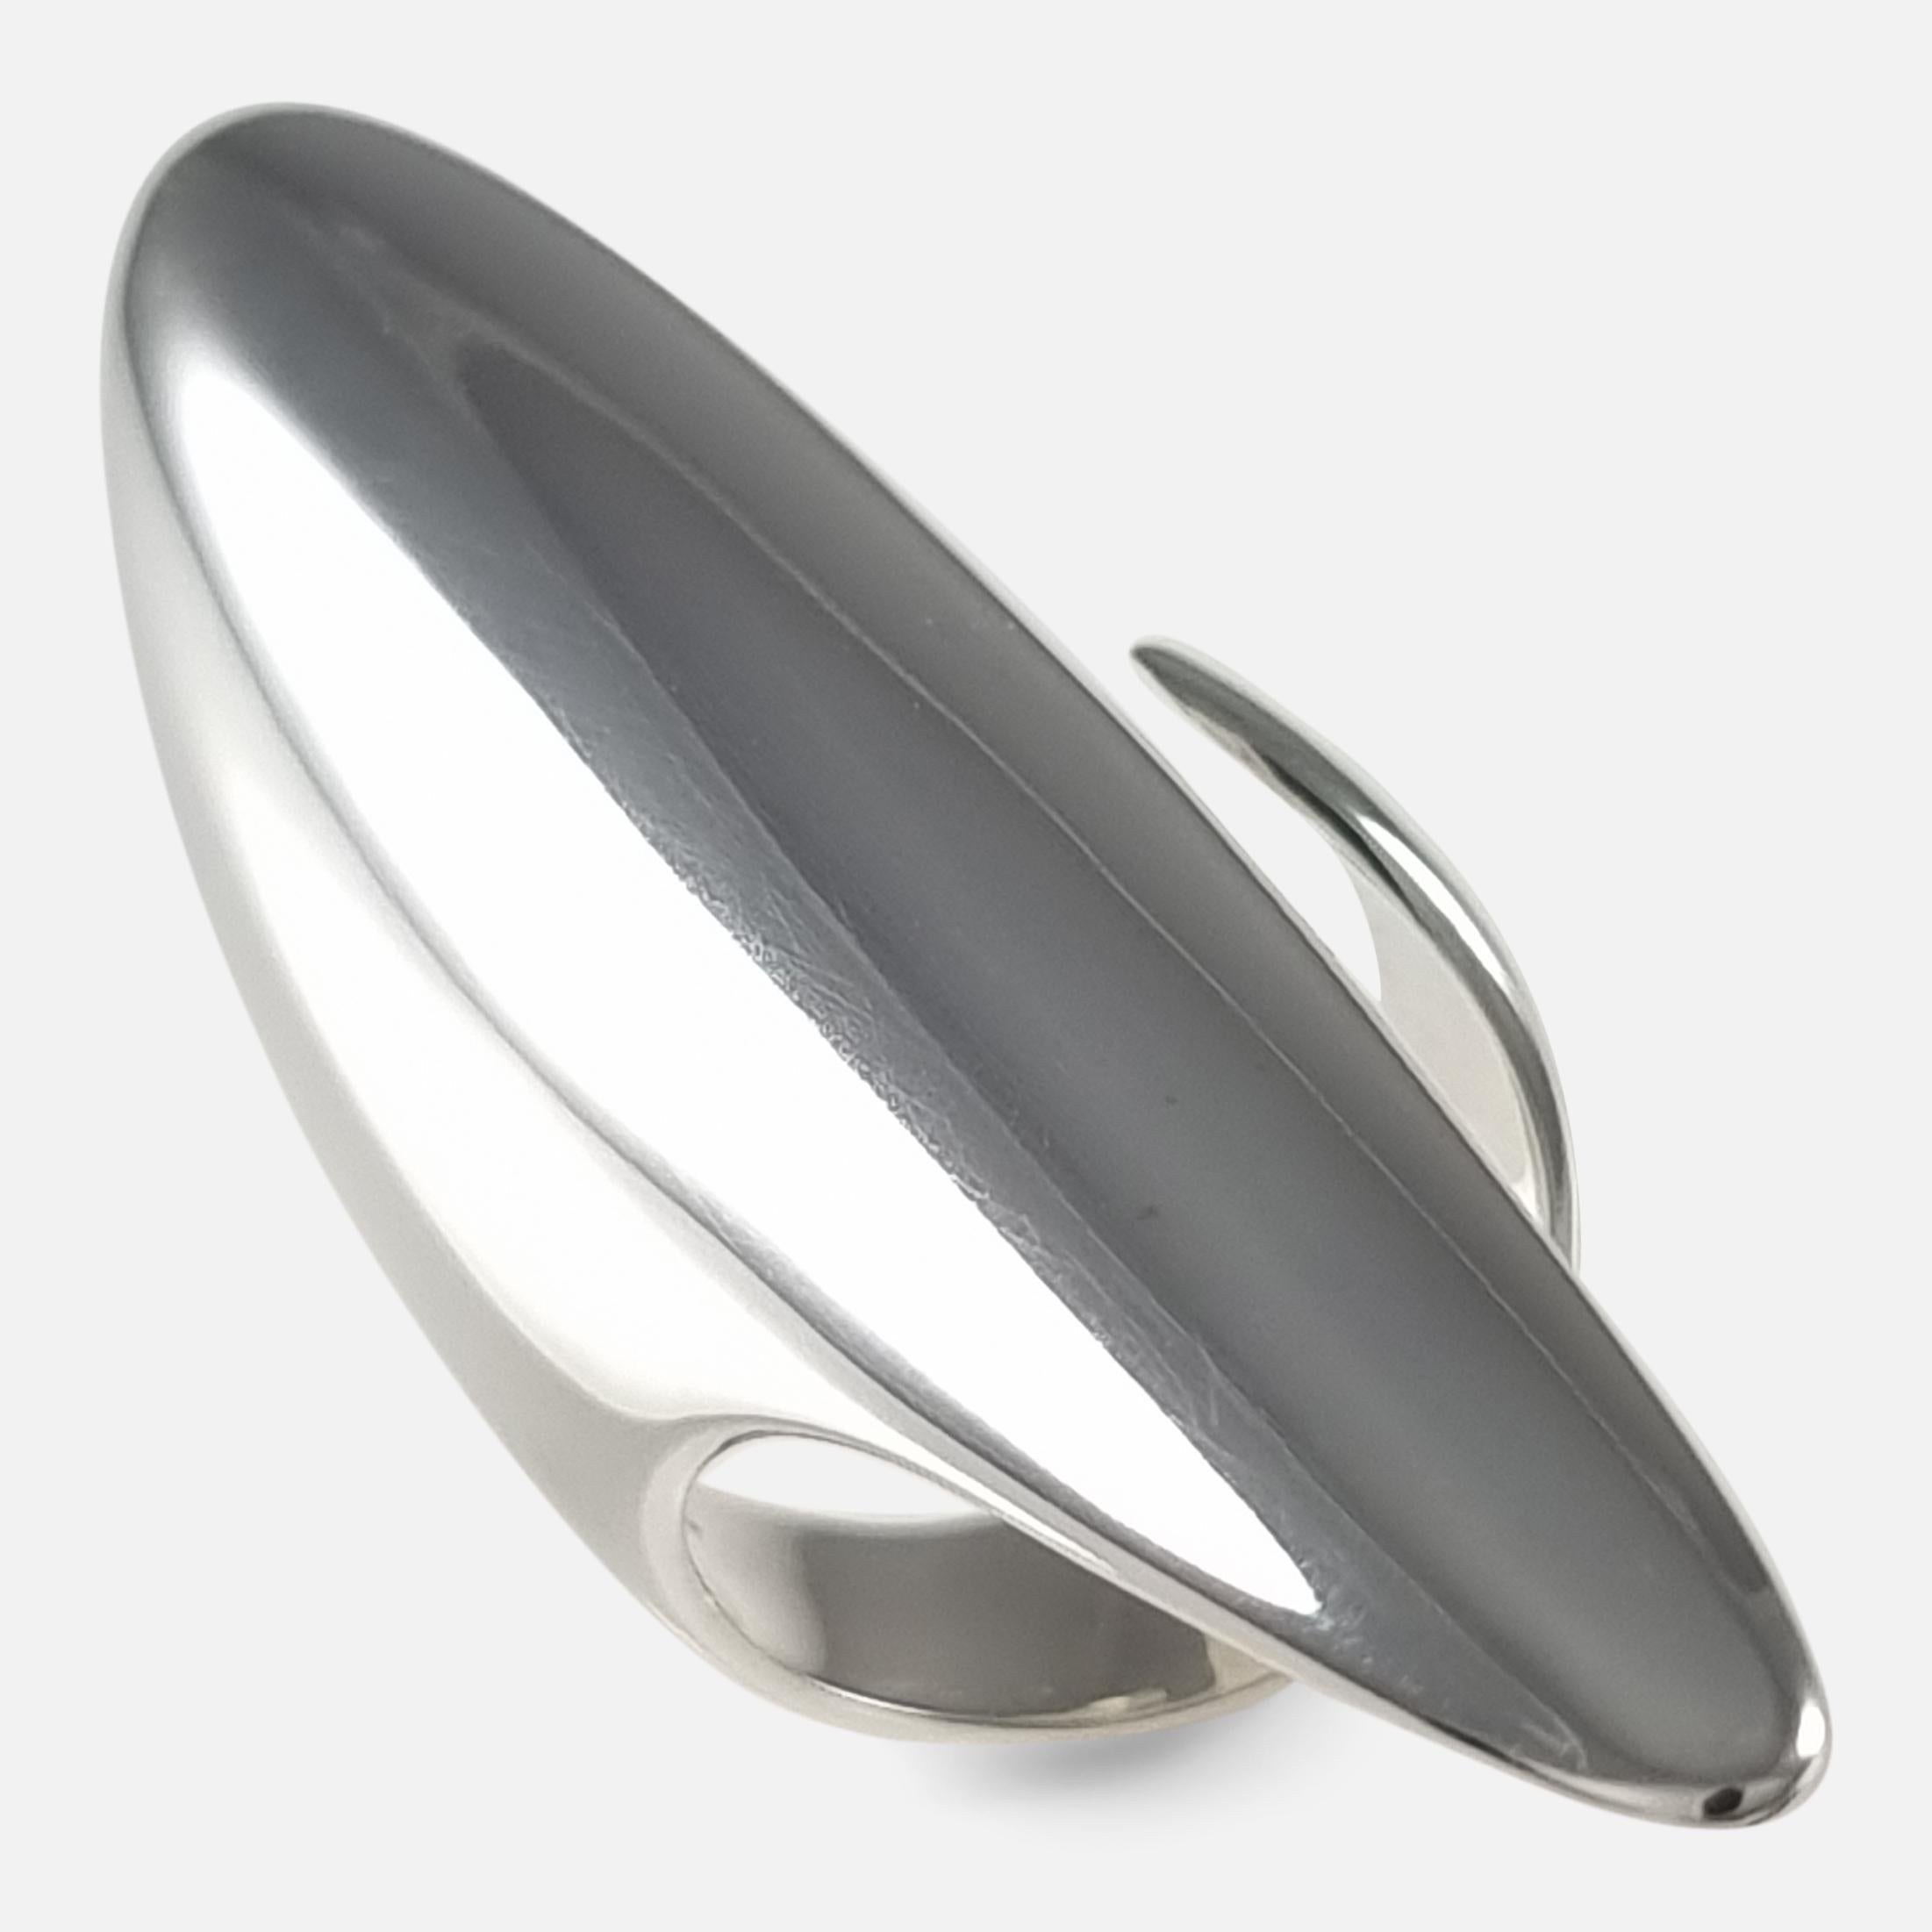 A sterling silver modernist ring #99, designed by Henning Koppel for Georg Jensen. 

Stamped Georg Jensen within dotted oval mark, '925 S', 'Denmark', & '99'. The ring is UK hallmarked, 925.

Period: - Late 20th Century.

Date: - Circa